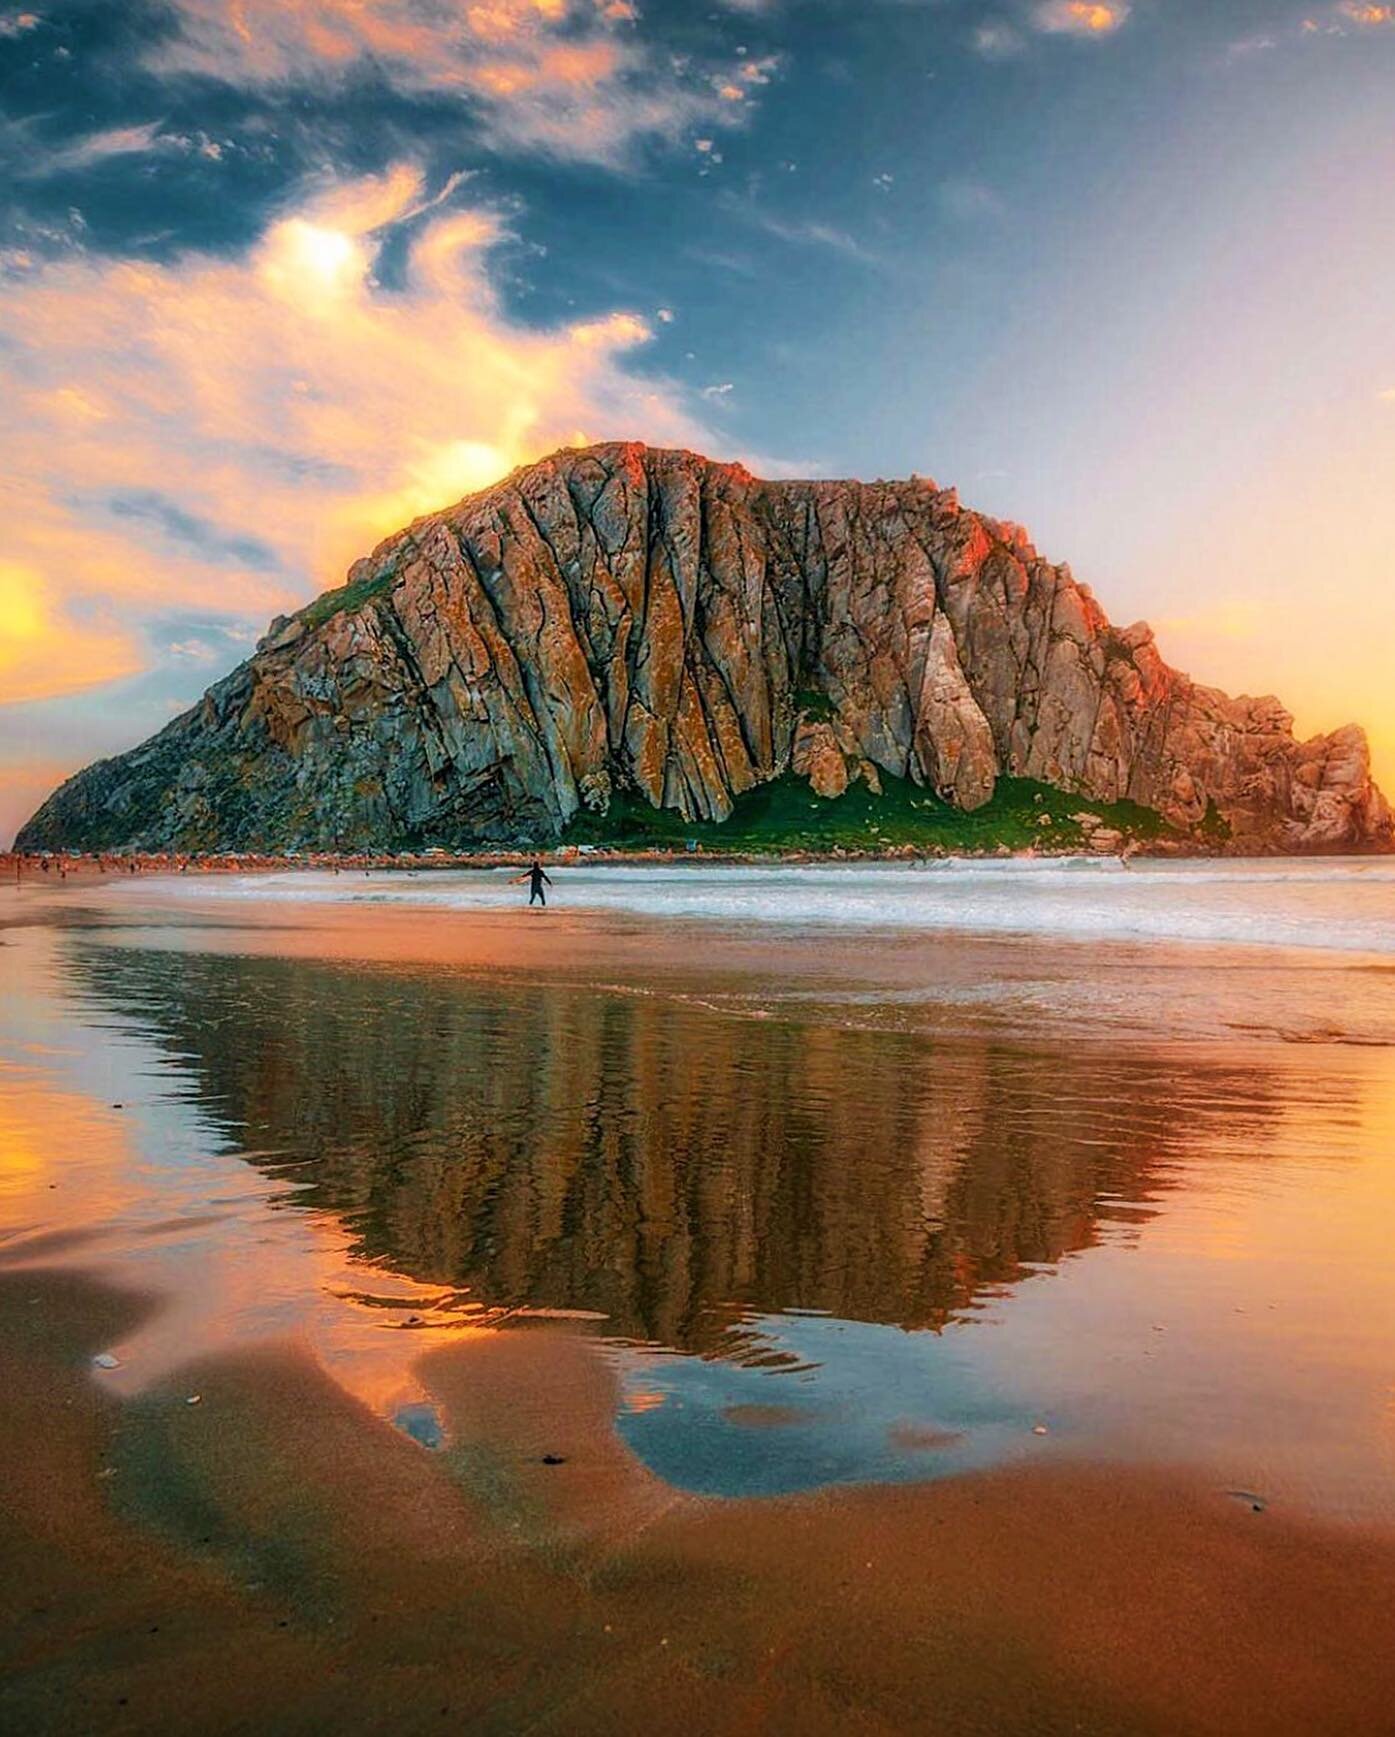 Autumn in Morro Bay and the Central Coast is a season full of foggy morning paddle-outs, thick wetsuits, warm beanies, hot coffee, brisk breezes, and insanely gorgeous sunsets! We are truly blessed to call this home!
Drop by for your favorite espress